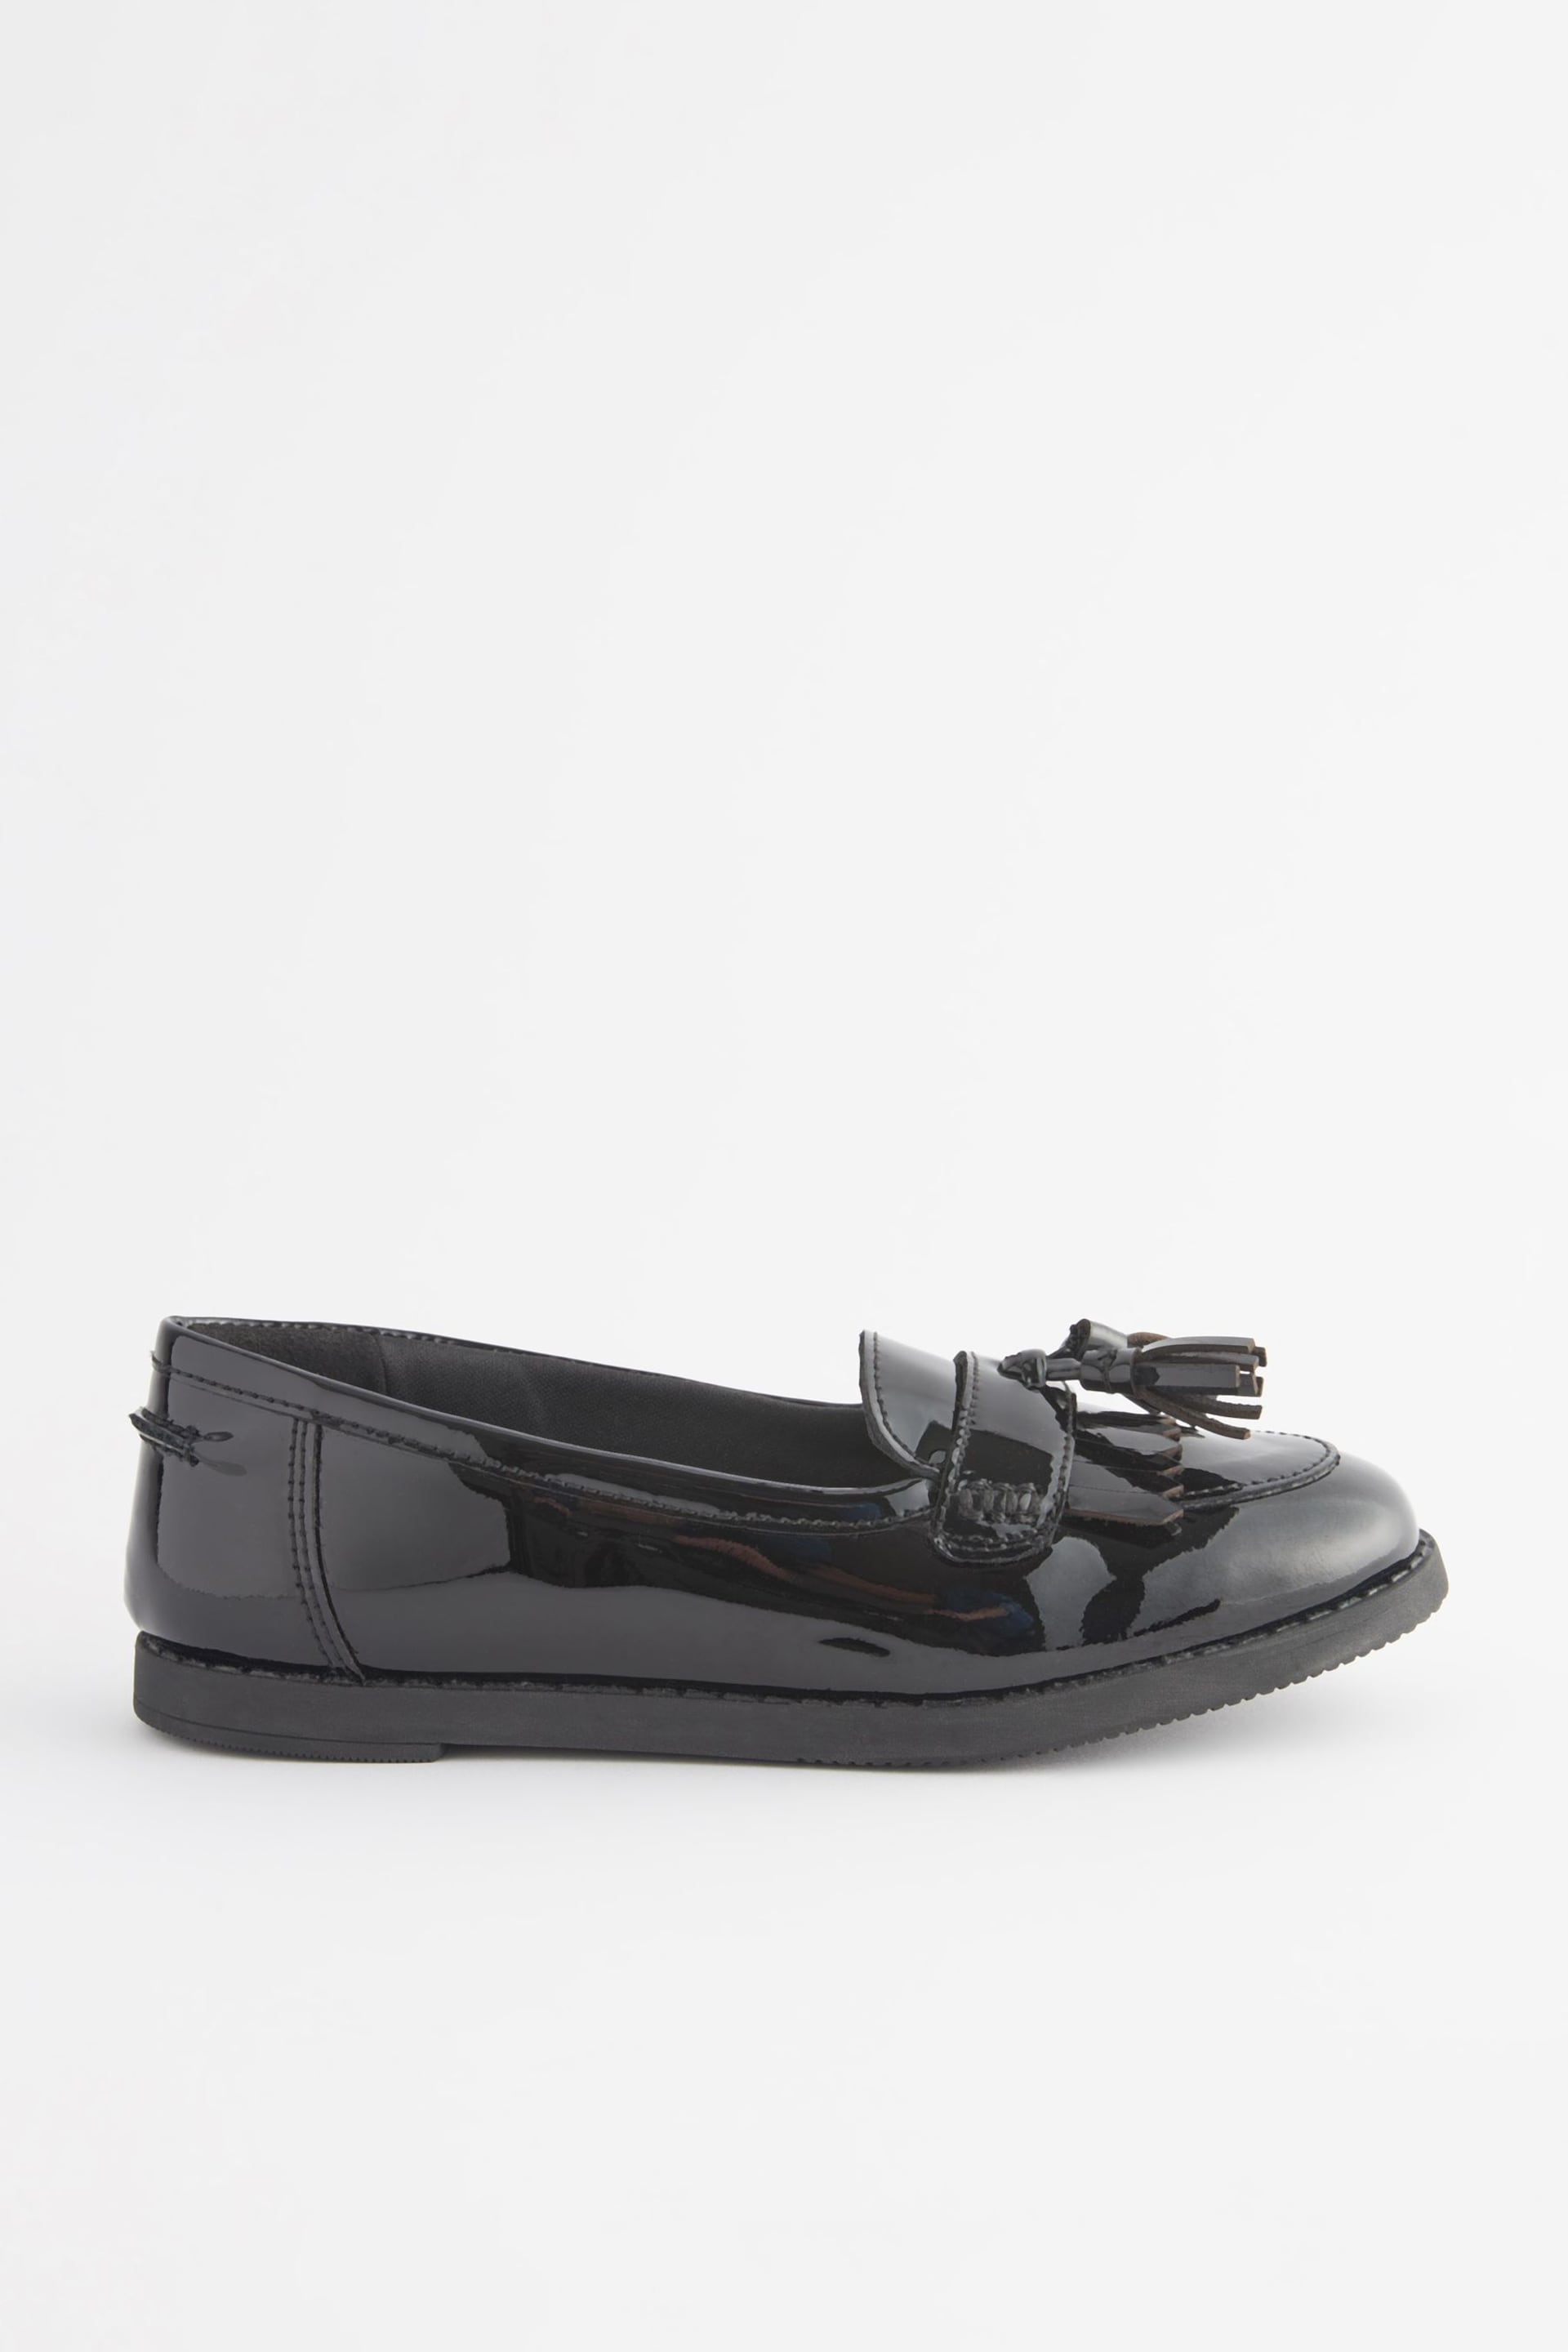 Black Patent Narrow Fit (E) School Leather Tassel Loafers - Image 2 of 5